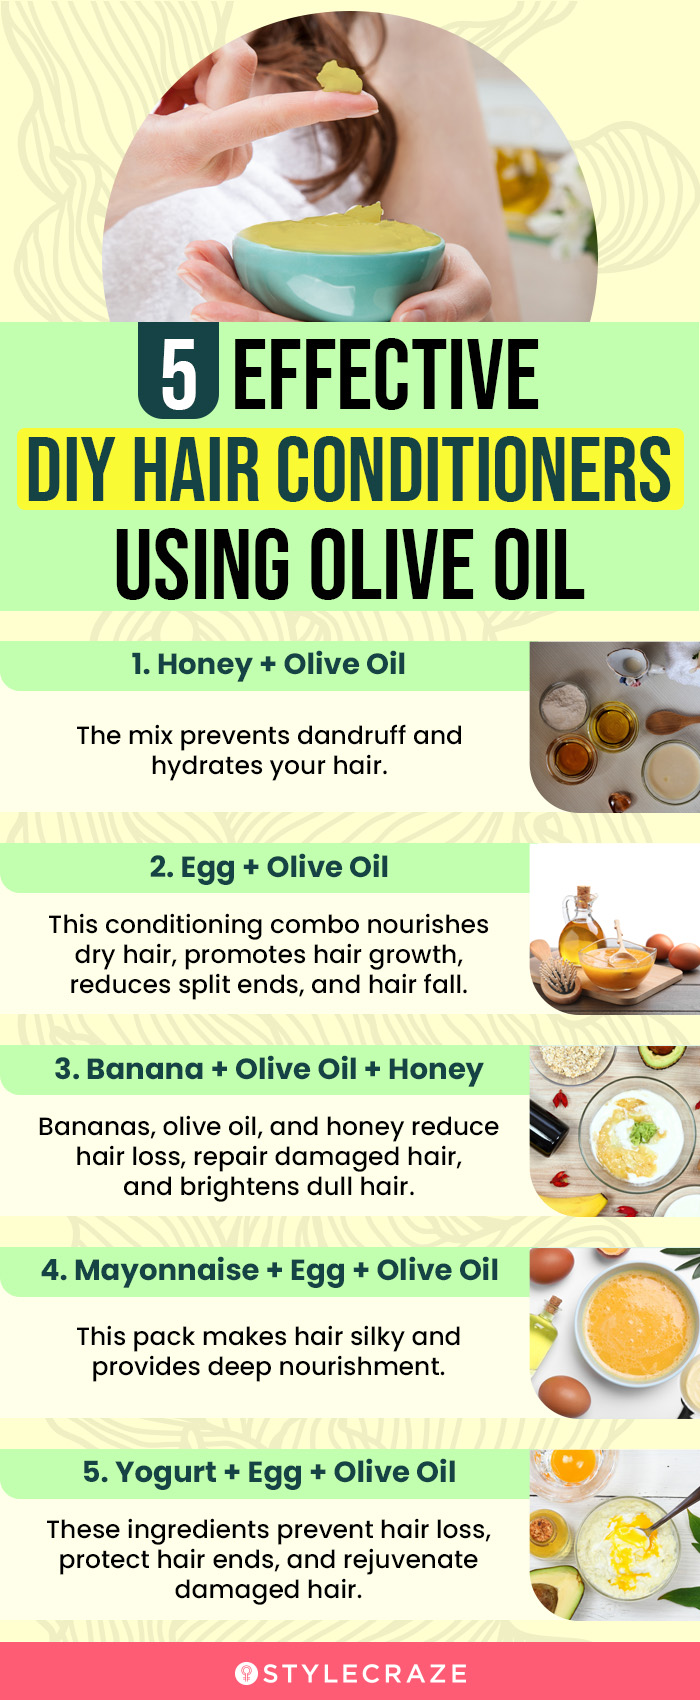 5 effective diy hair conditioners using olive oil (infographic)